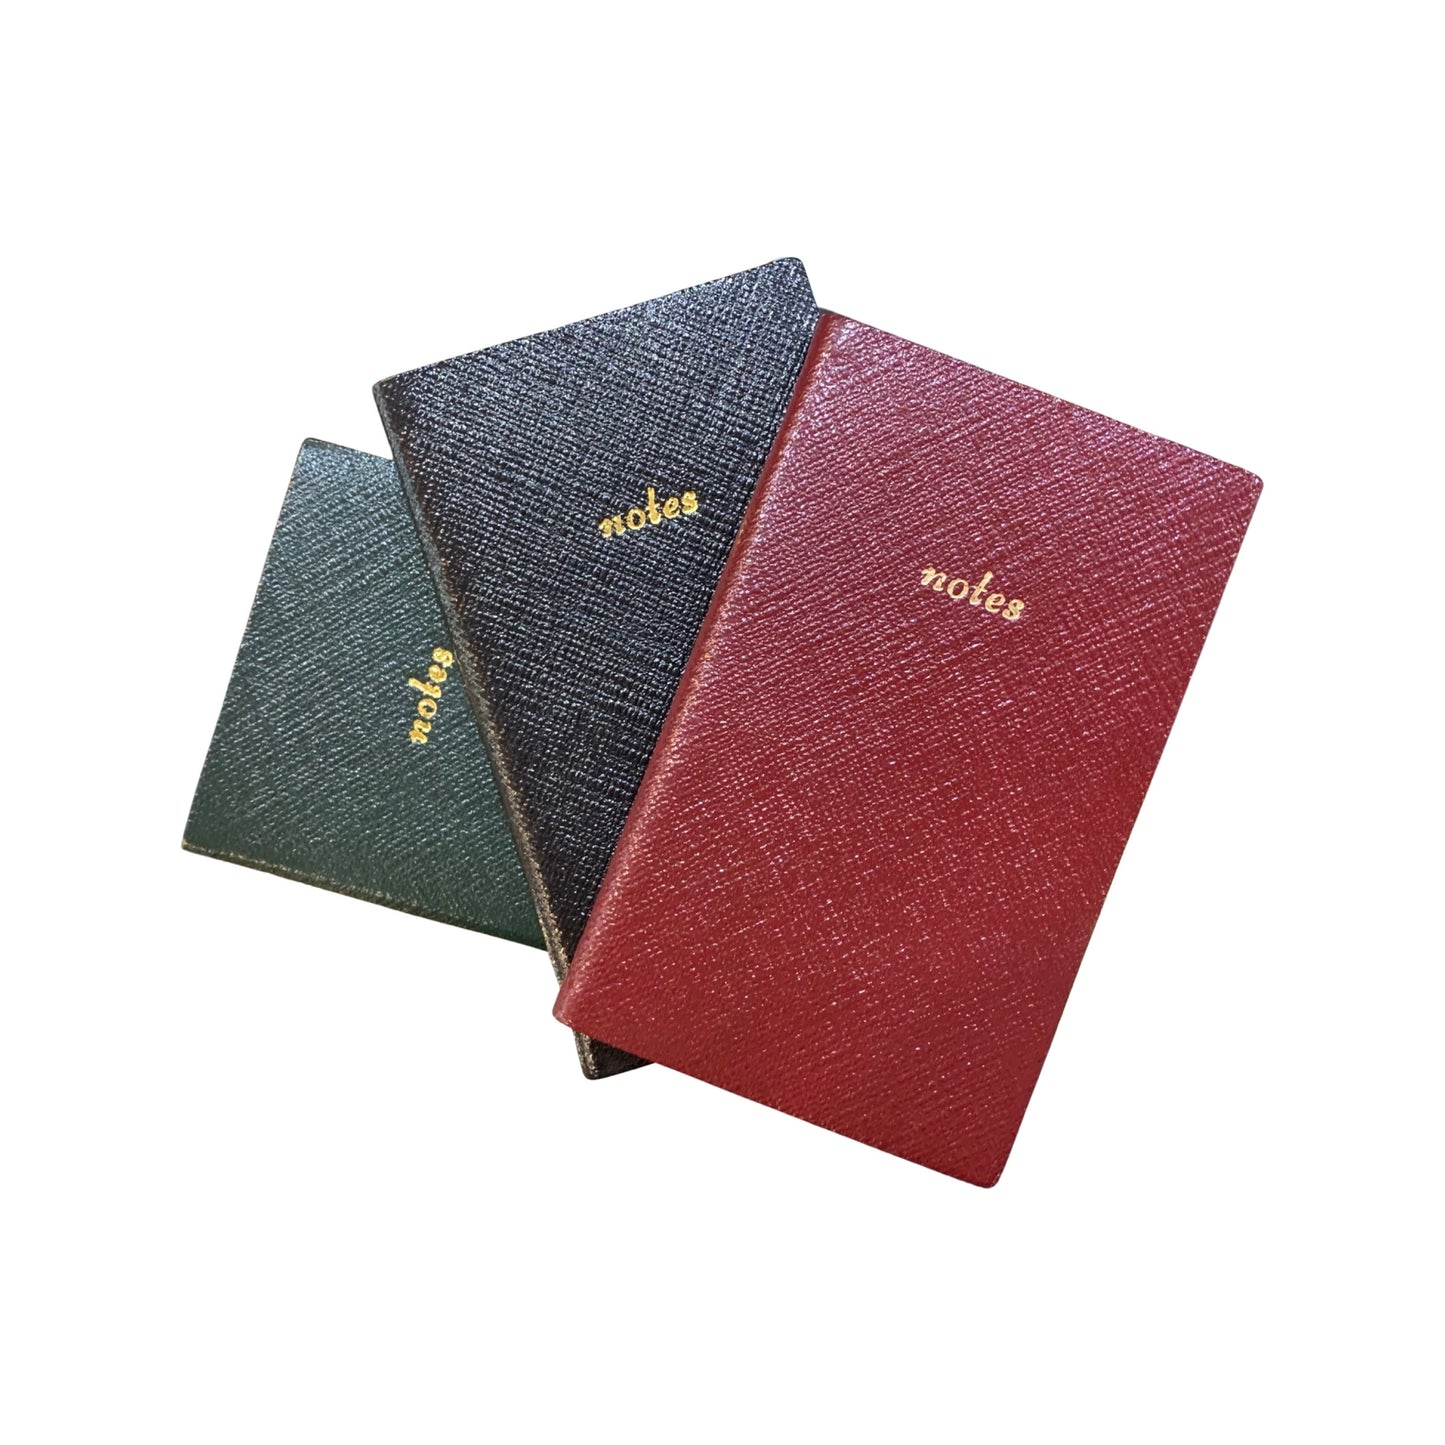 Leather Notebook | 5x3" | Crossgrain Leather | Titled: Notes | N53L